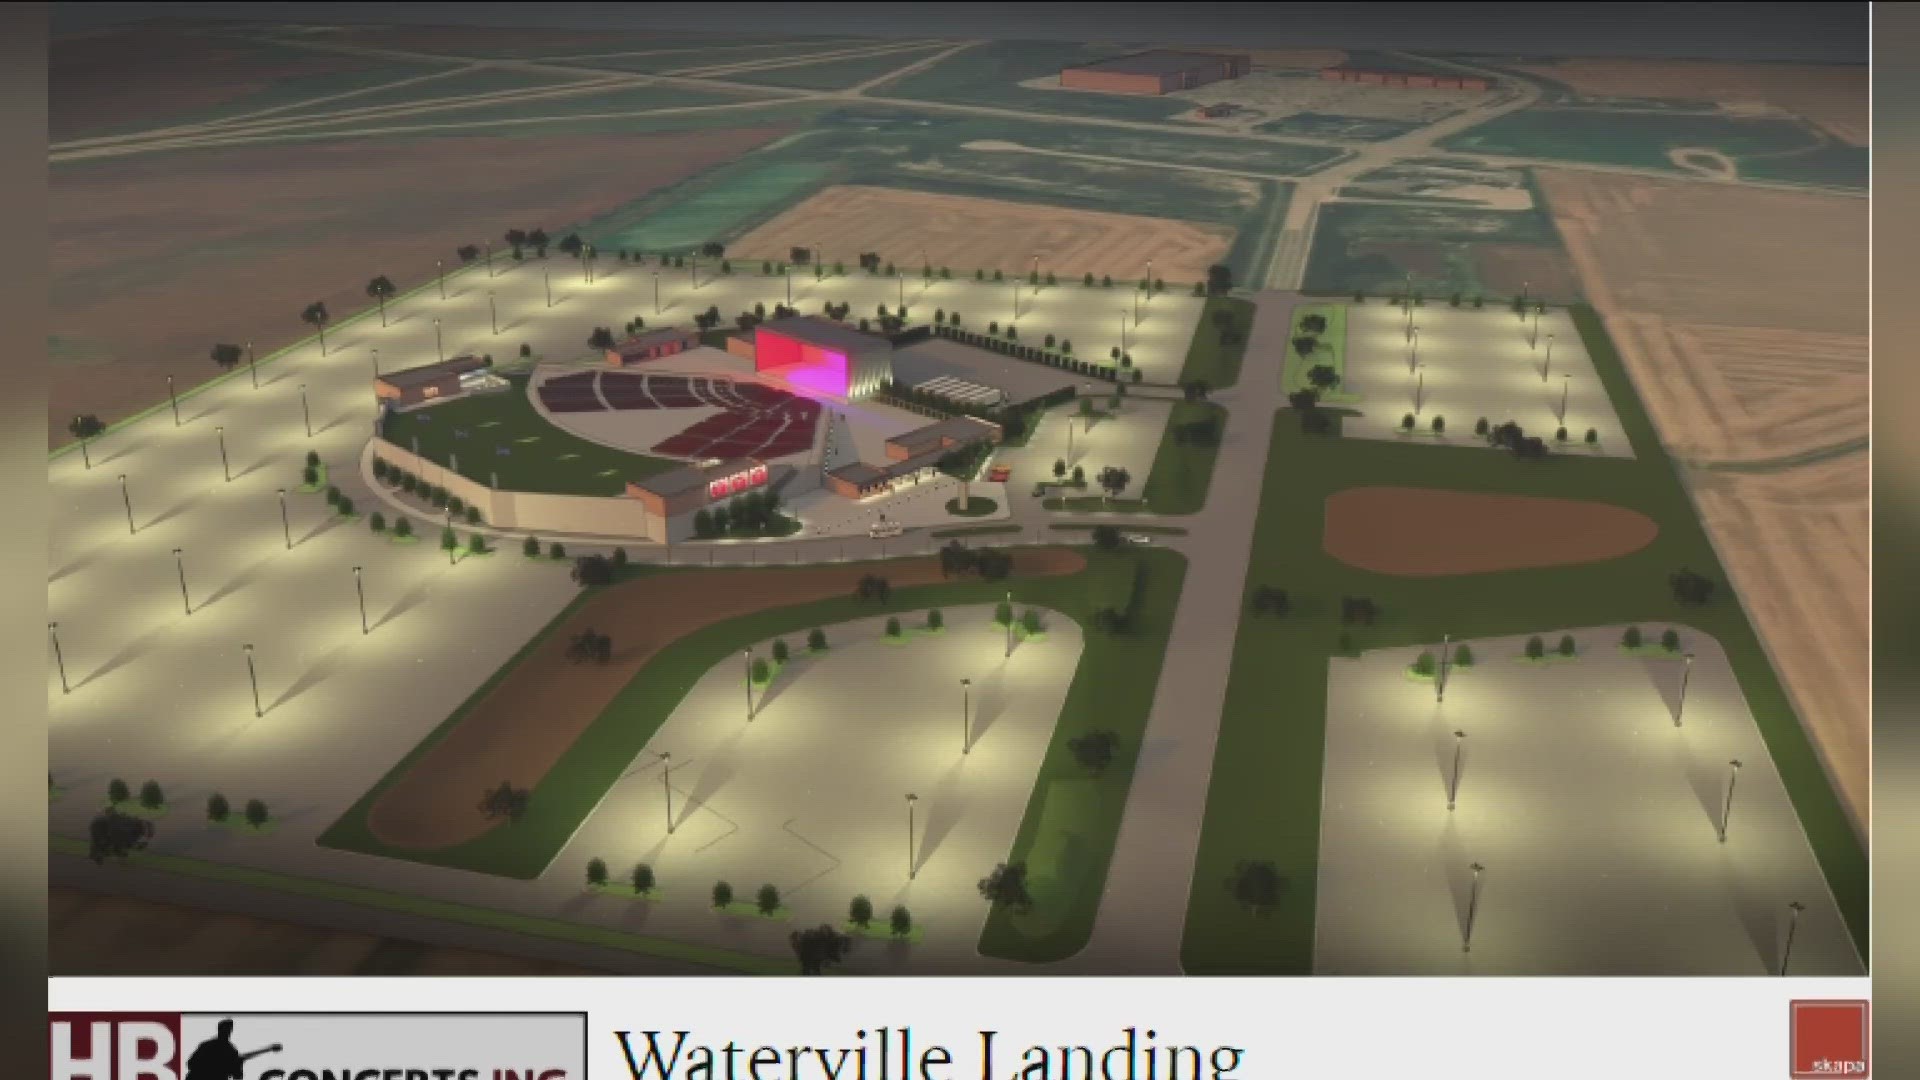 The Ohio Secretary of State's office will cast the deciding vote after discussing with its lawyers. If approved, the Waterville ampitheater would go on the ballot.